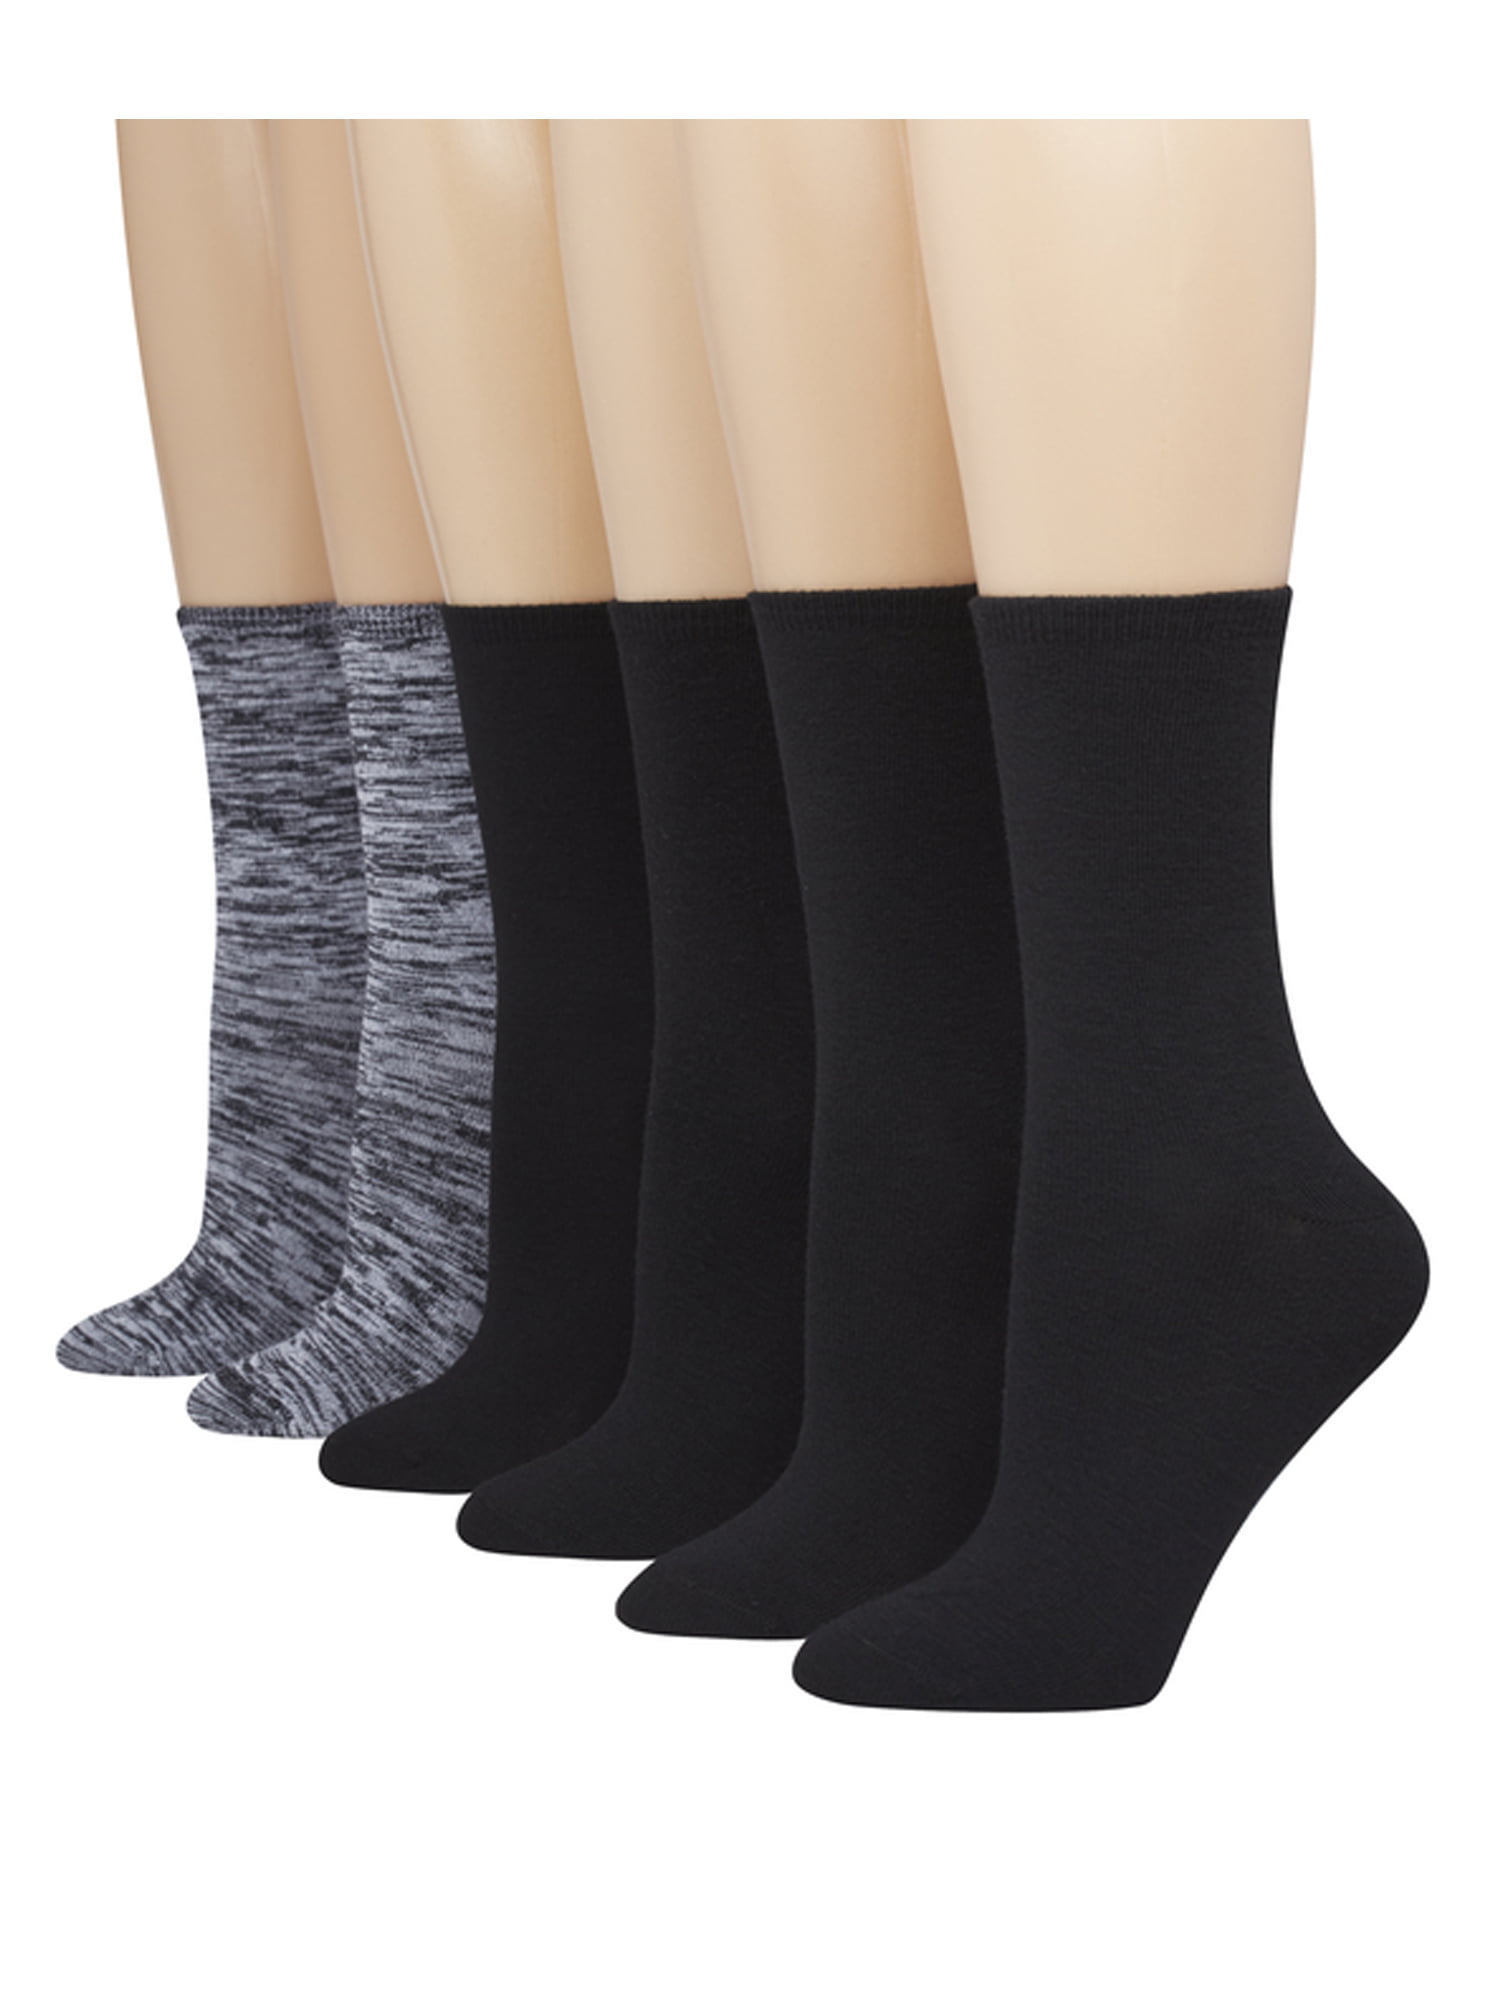 Womens Black Thin Cotton Socks High Ankle 6 Pack